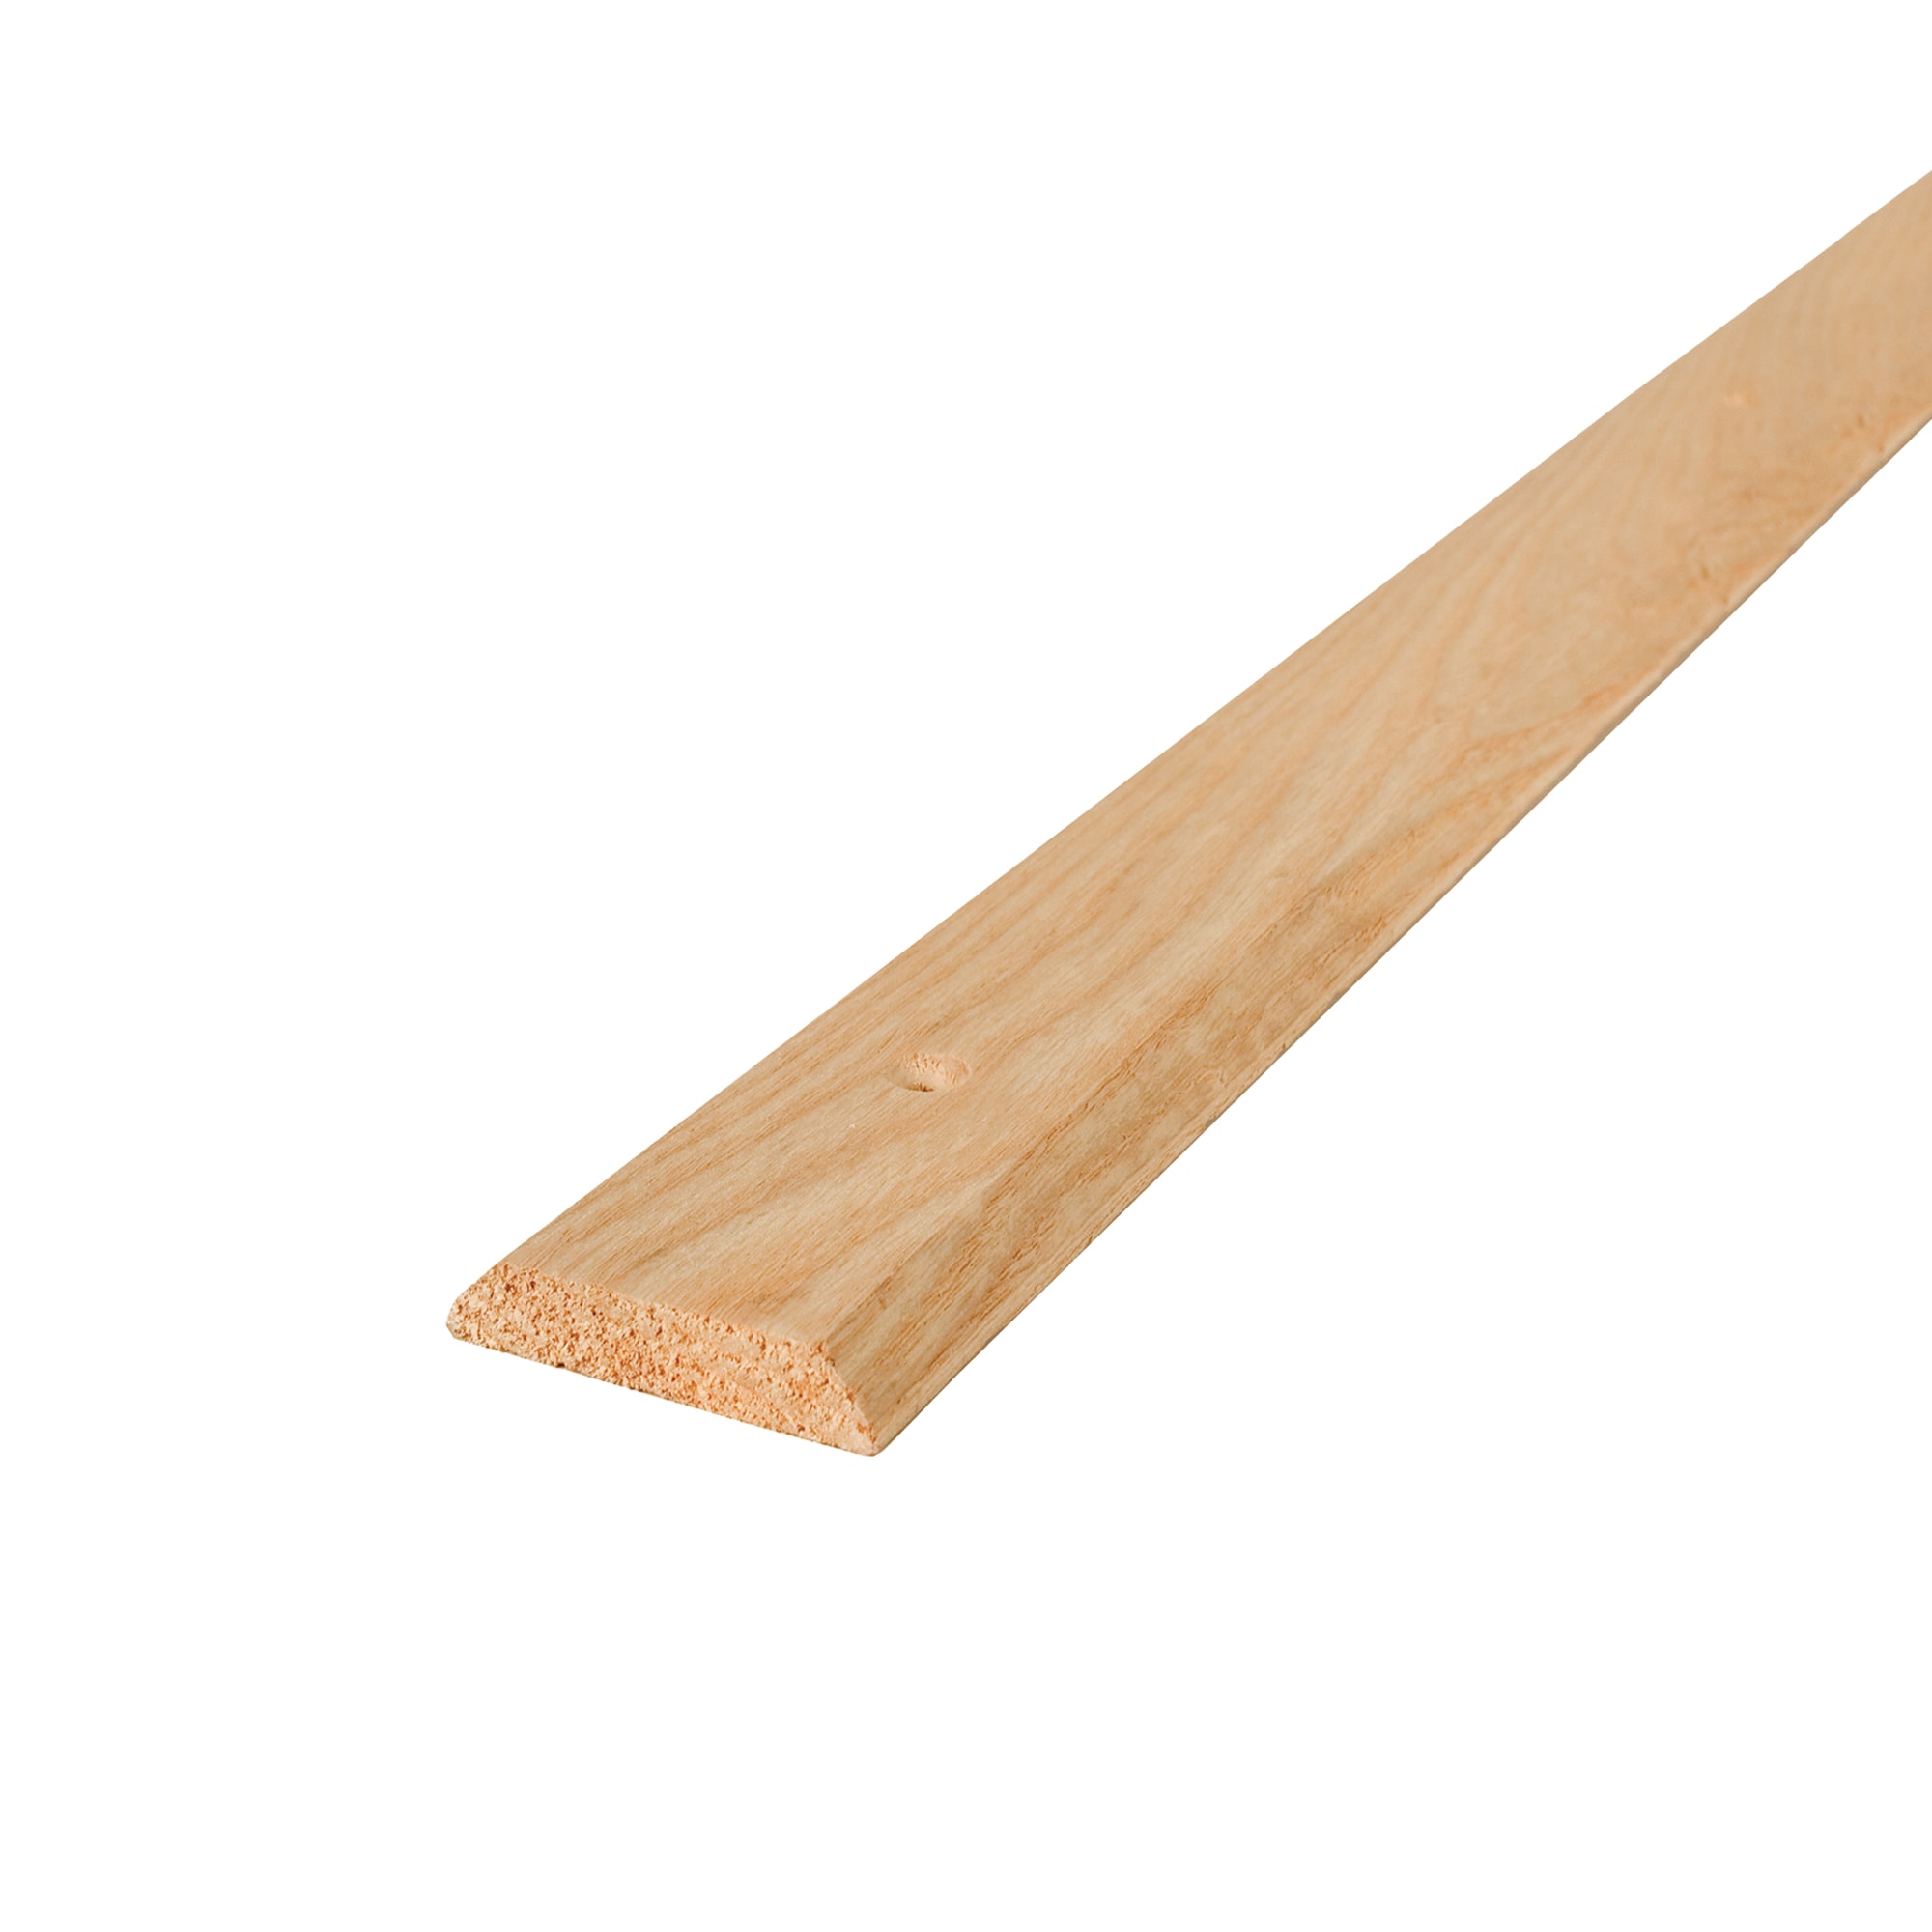 Oak Wood Strips 1/8 x 1/8 x 24 (25) - Quantity is Listed in Parenthesis in  Title